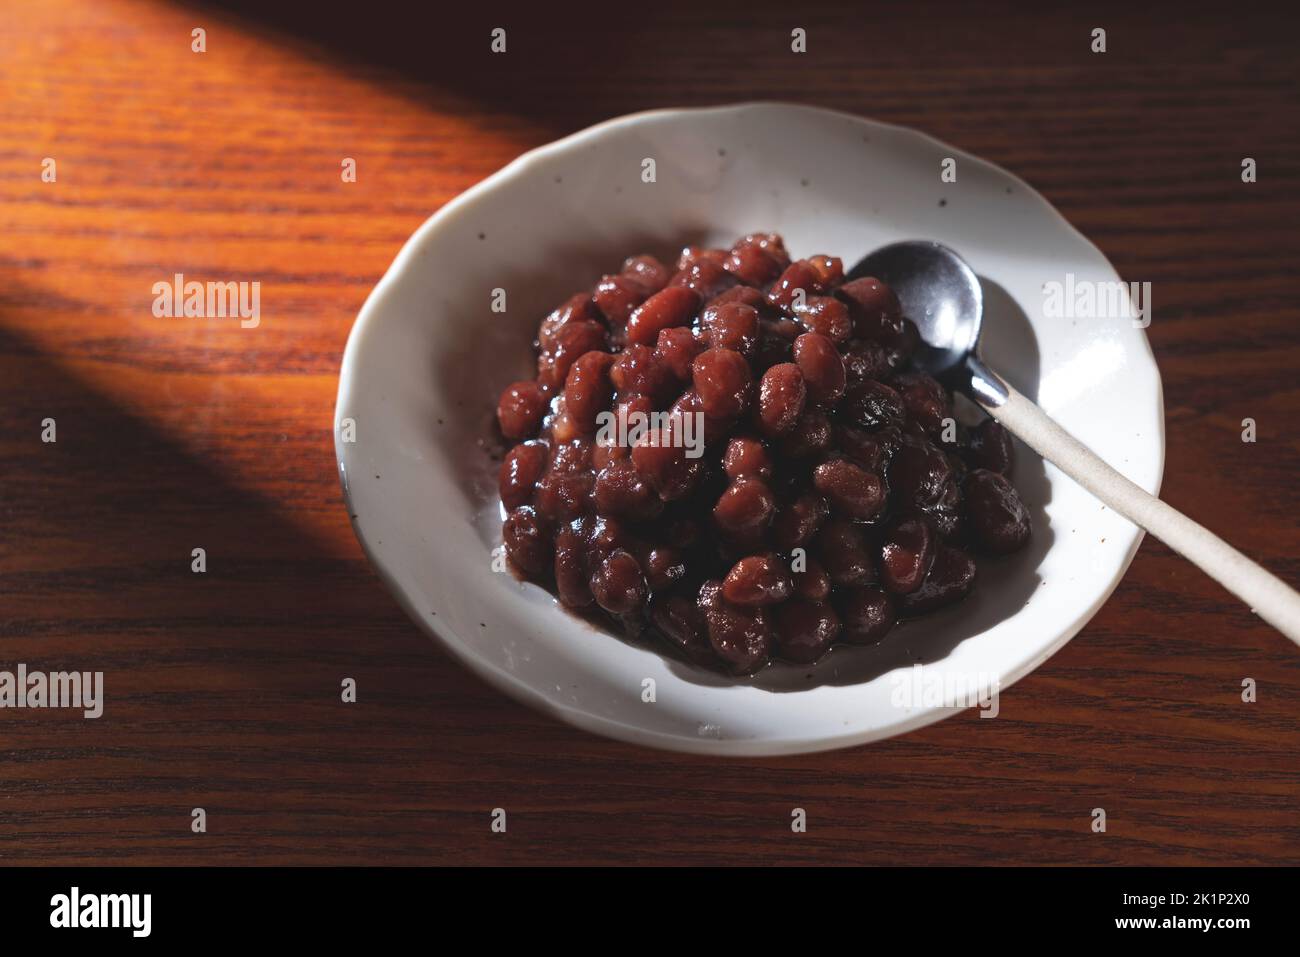 Boiled azuki beans in a dish placed on a wooden background. Stock Photo